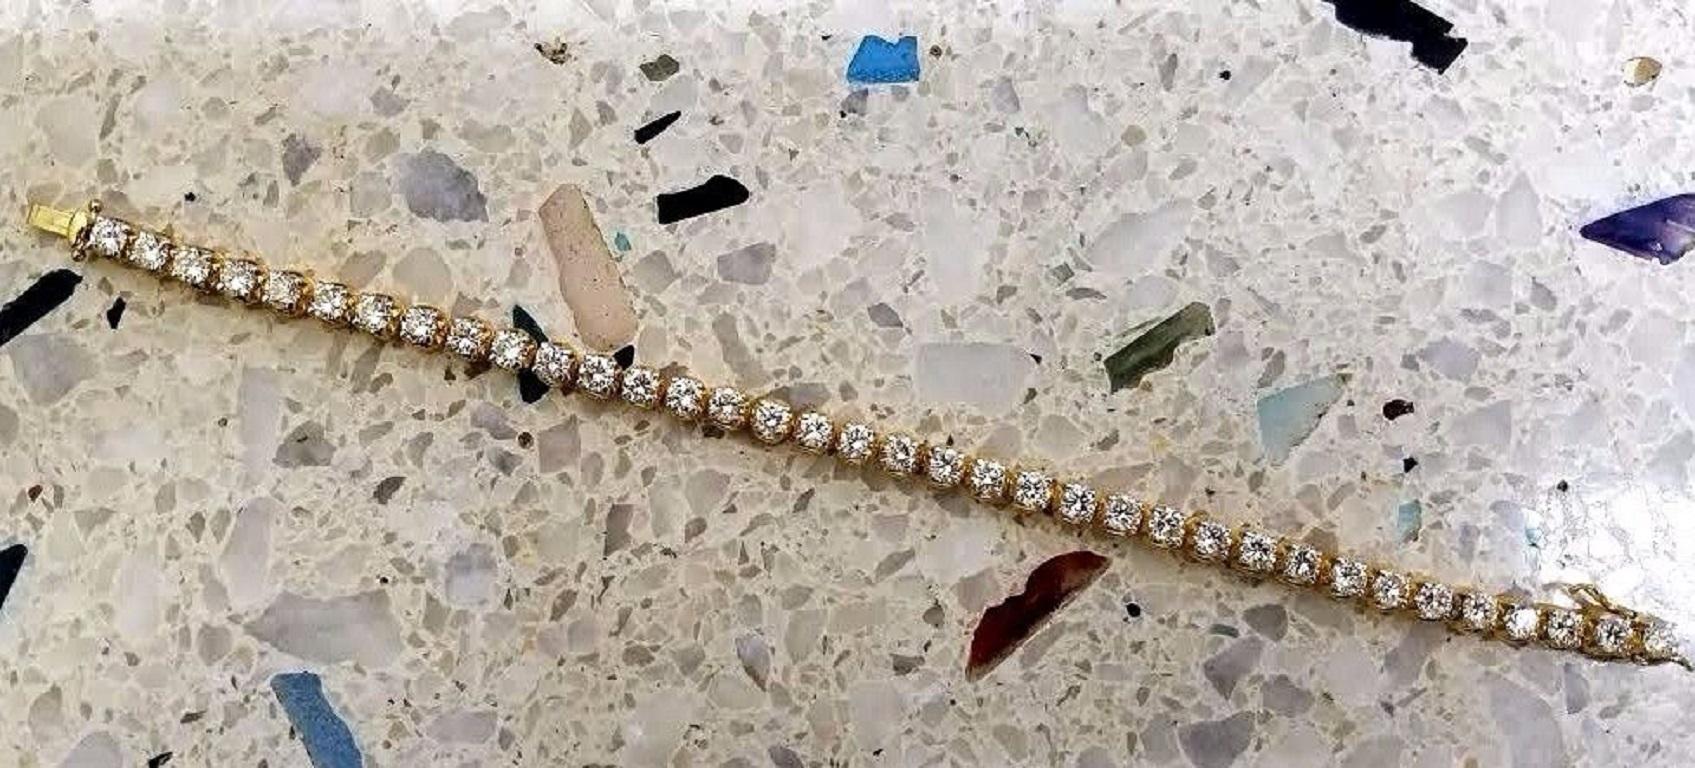 Victorian High Profile Petite

5.40CT Classic Diamond Tennis Bracelet
 Vs-2 clarity, G-color

12.3 grams

6.25 inches (wearable length)

Secure pressure clasp.

$14000 Appraisal will accompany

Excellent design // Brilliant sparkles from all angles.